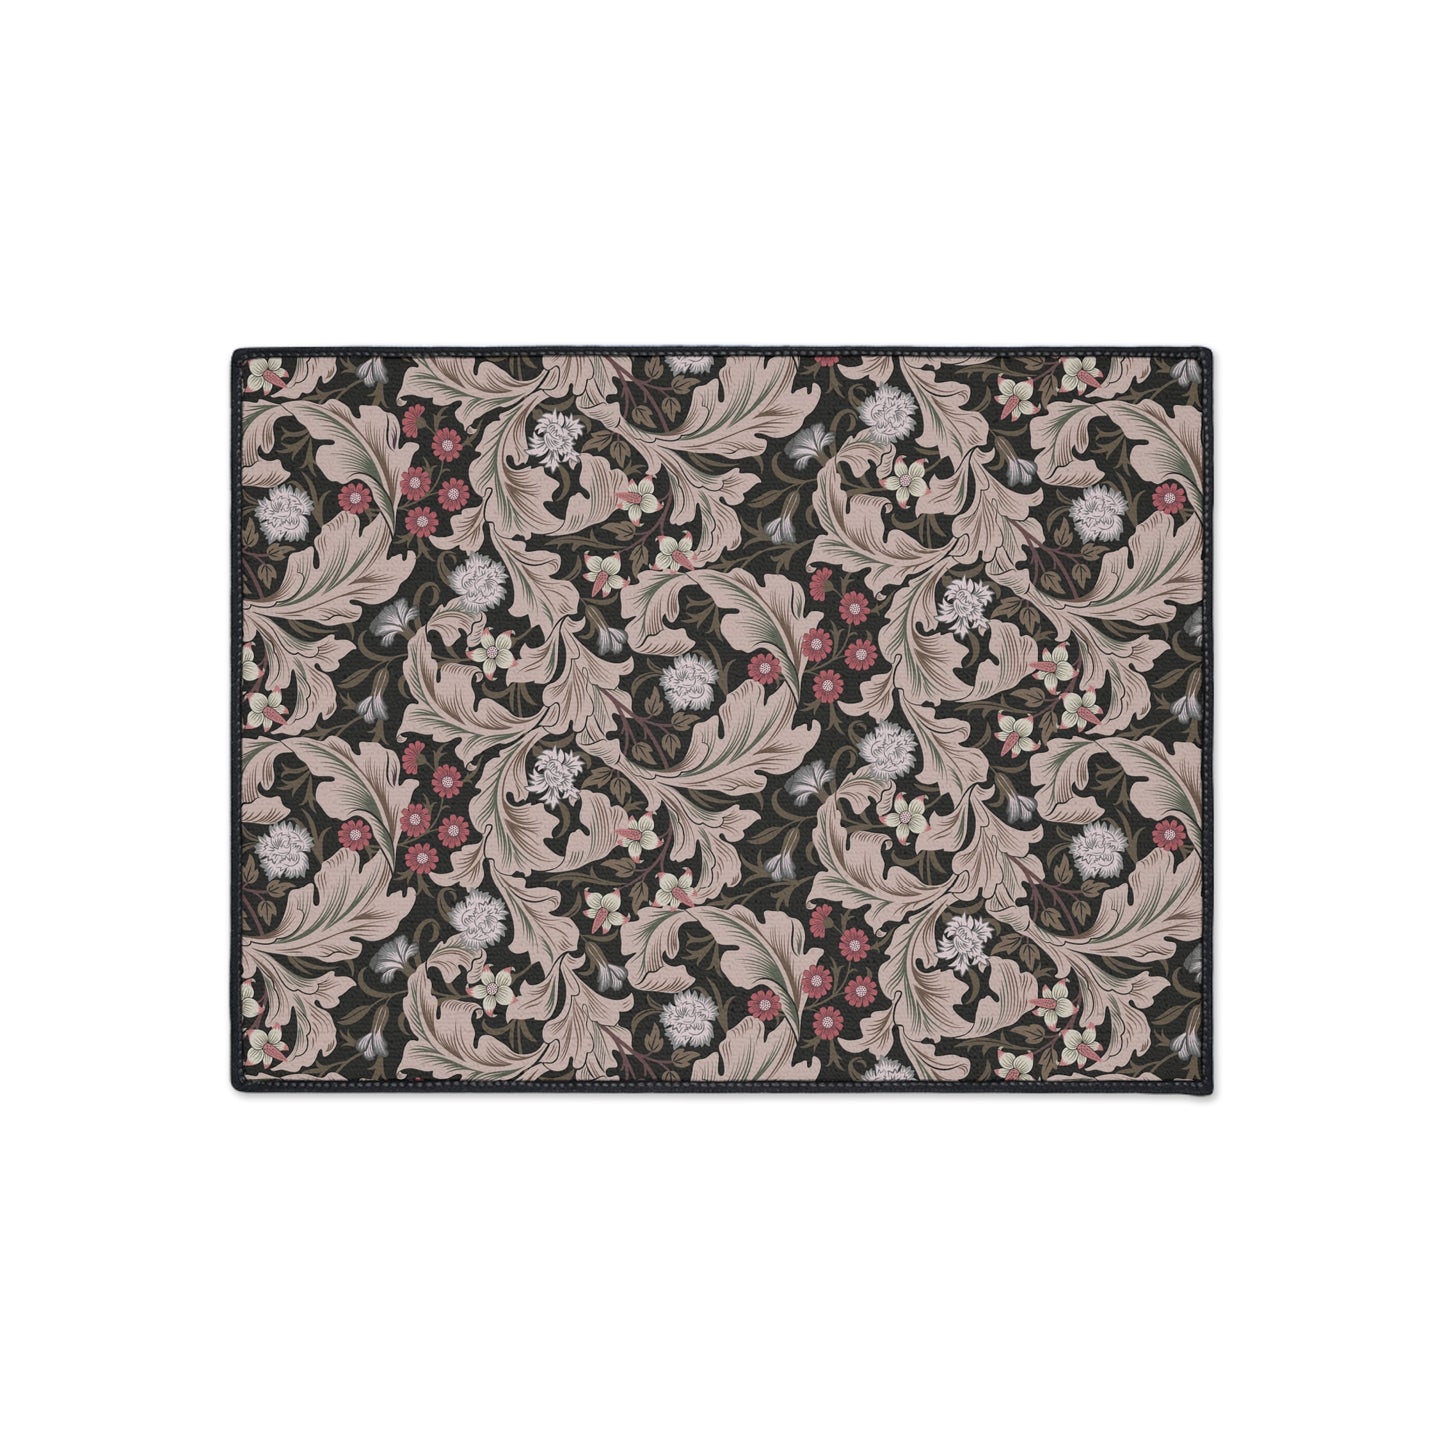 william-morris-co-heavy-duty-floor-mat-leicester-collection-mocha-5